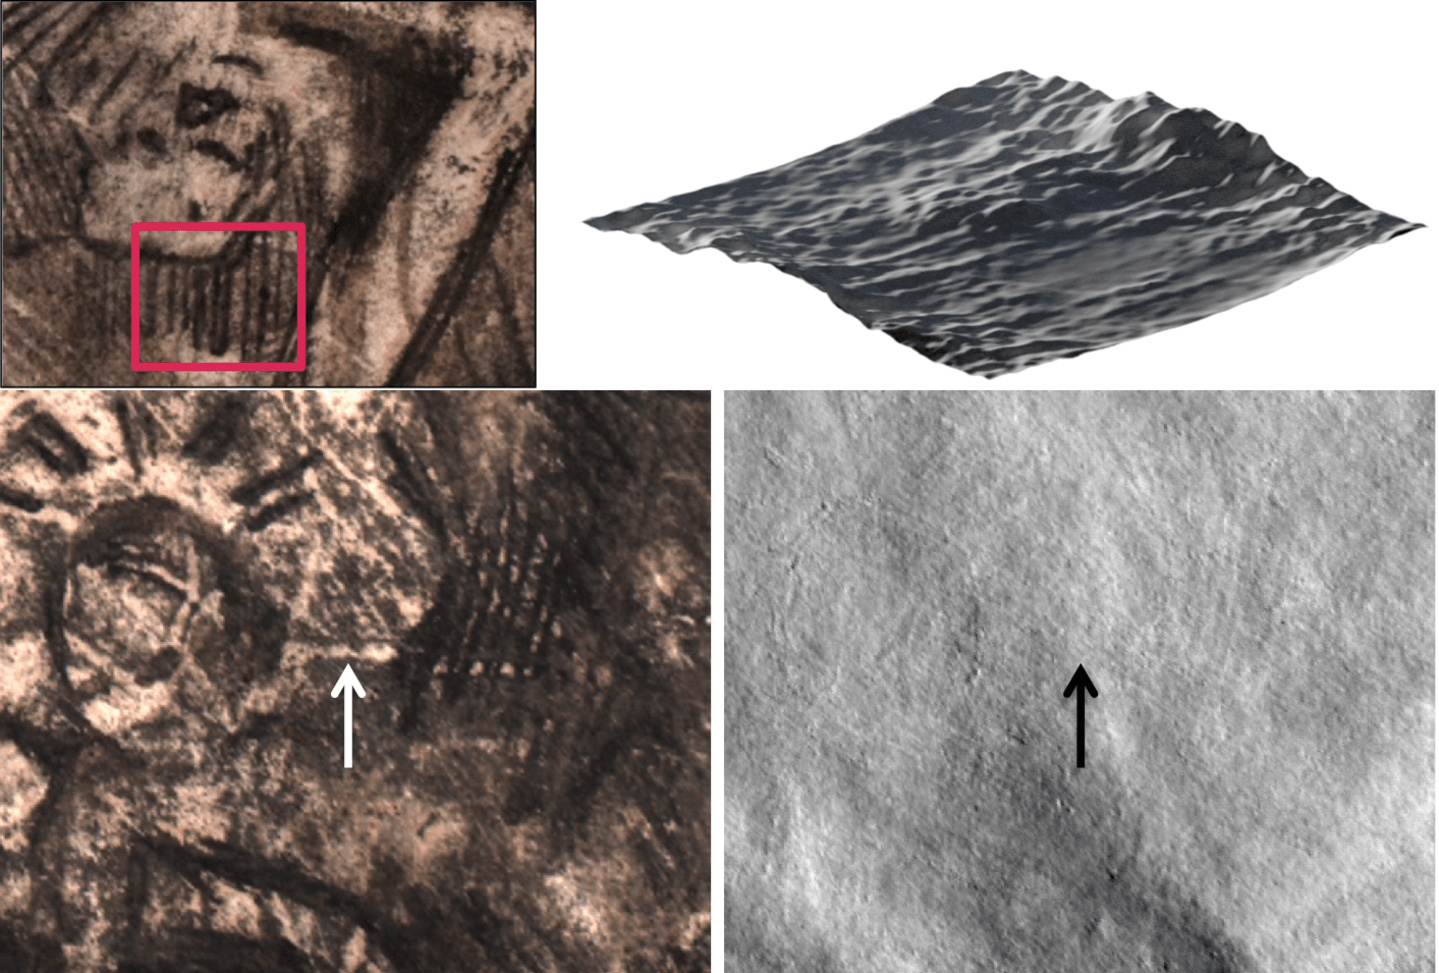 Subtle topographical features reveal printmaking techniques. Visible in the top left panel and the top right 3D rendering are line protrusions from the monotype printing. In the bottom left image, one area of 'blind incision' is marked by the arrow. In the bottom right panel, the corresponding area is pictured after photometric stereo.